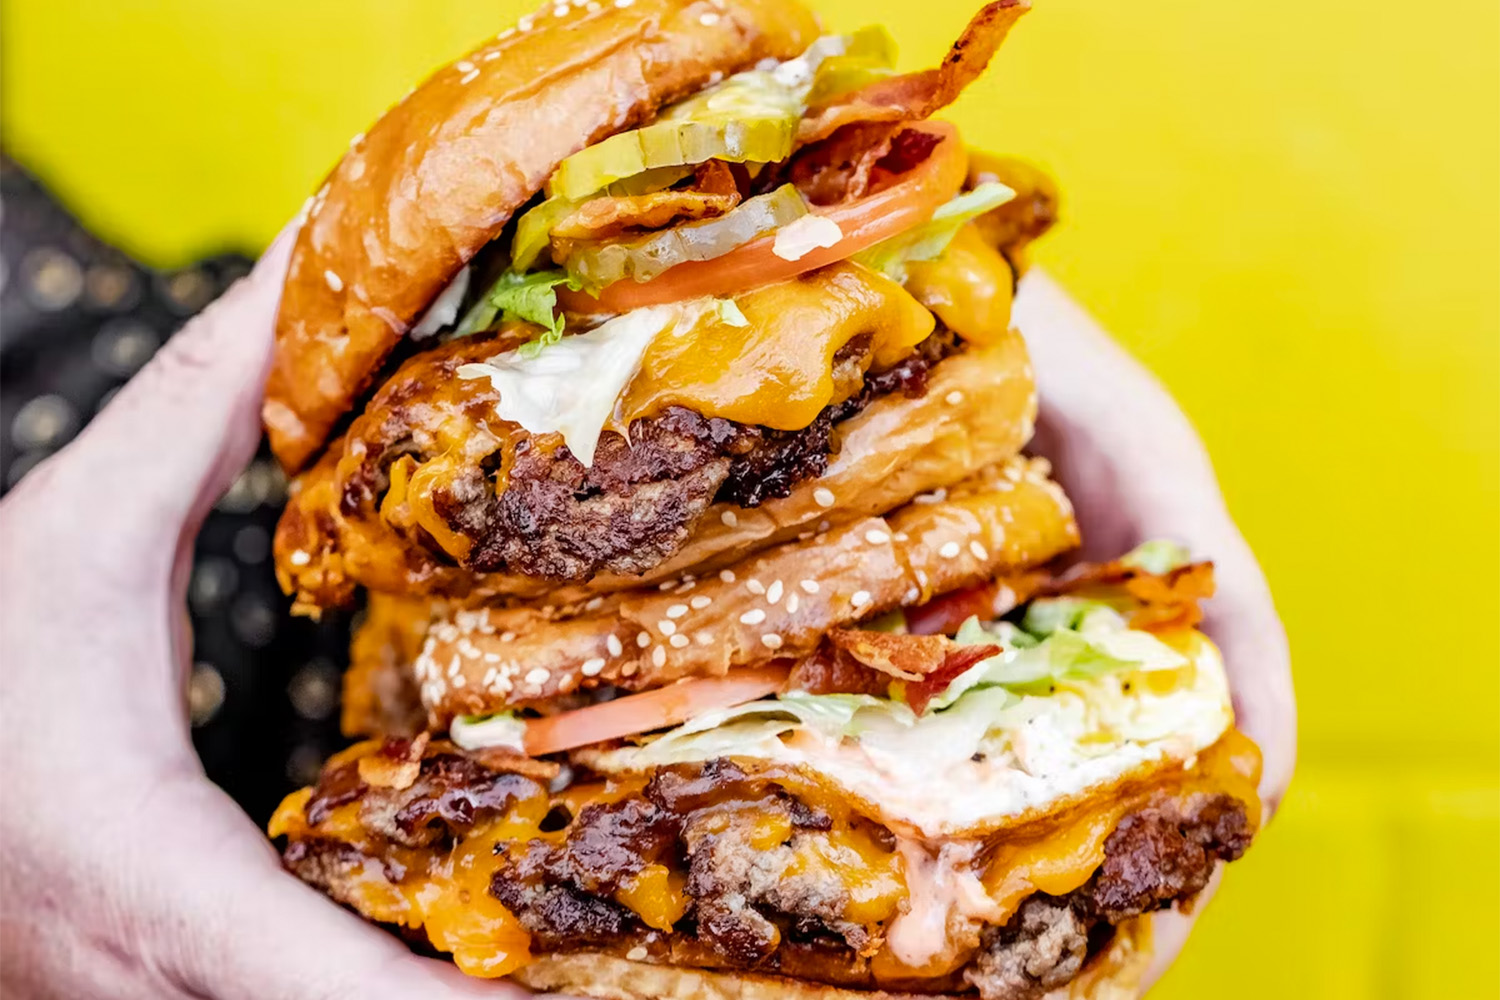 Two burgers being held in front of a yellow wall